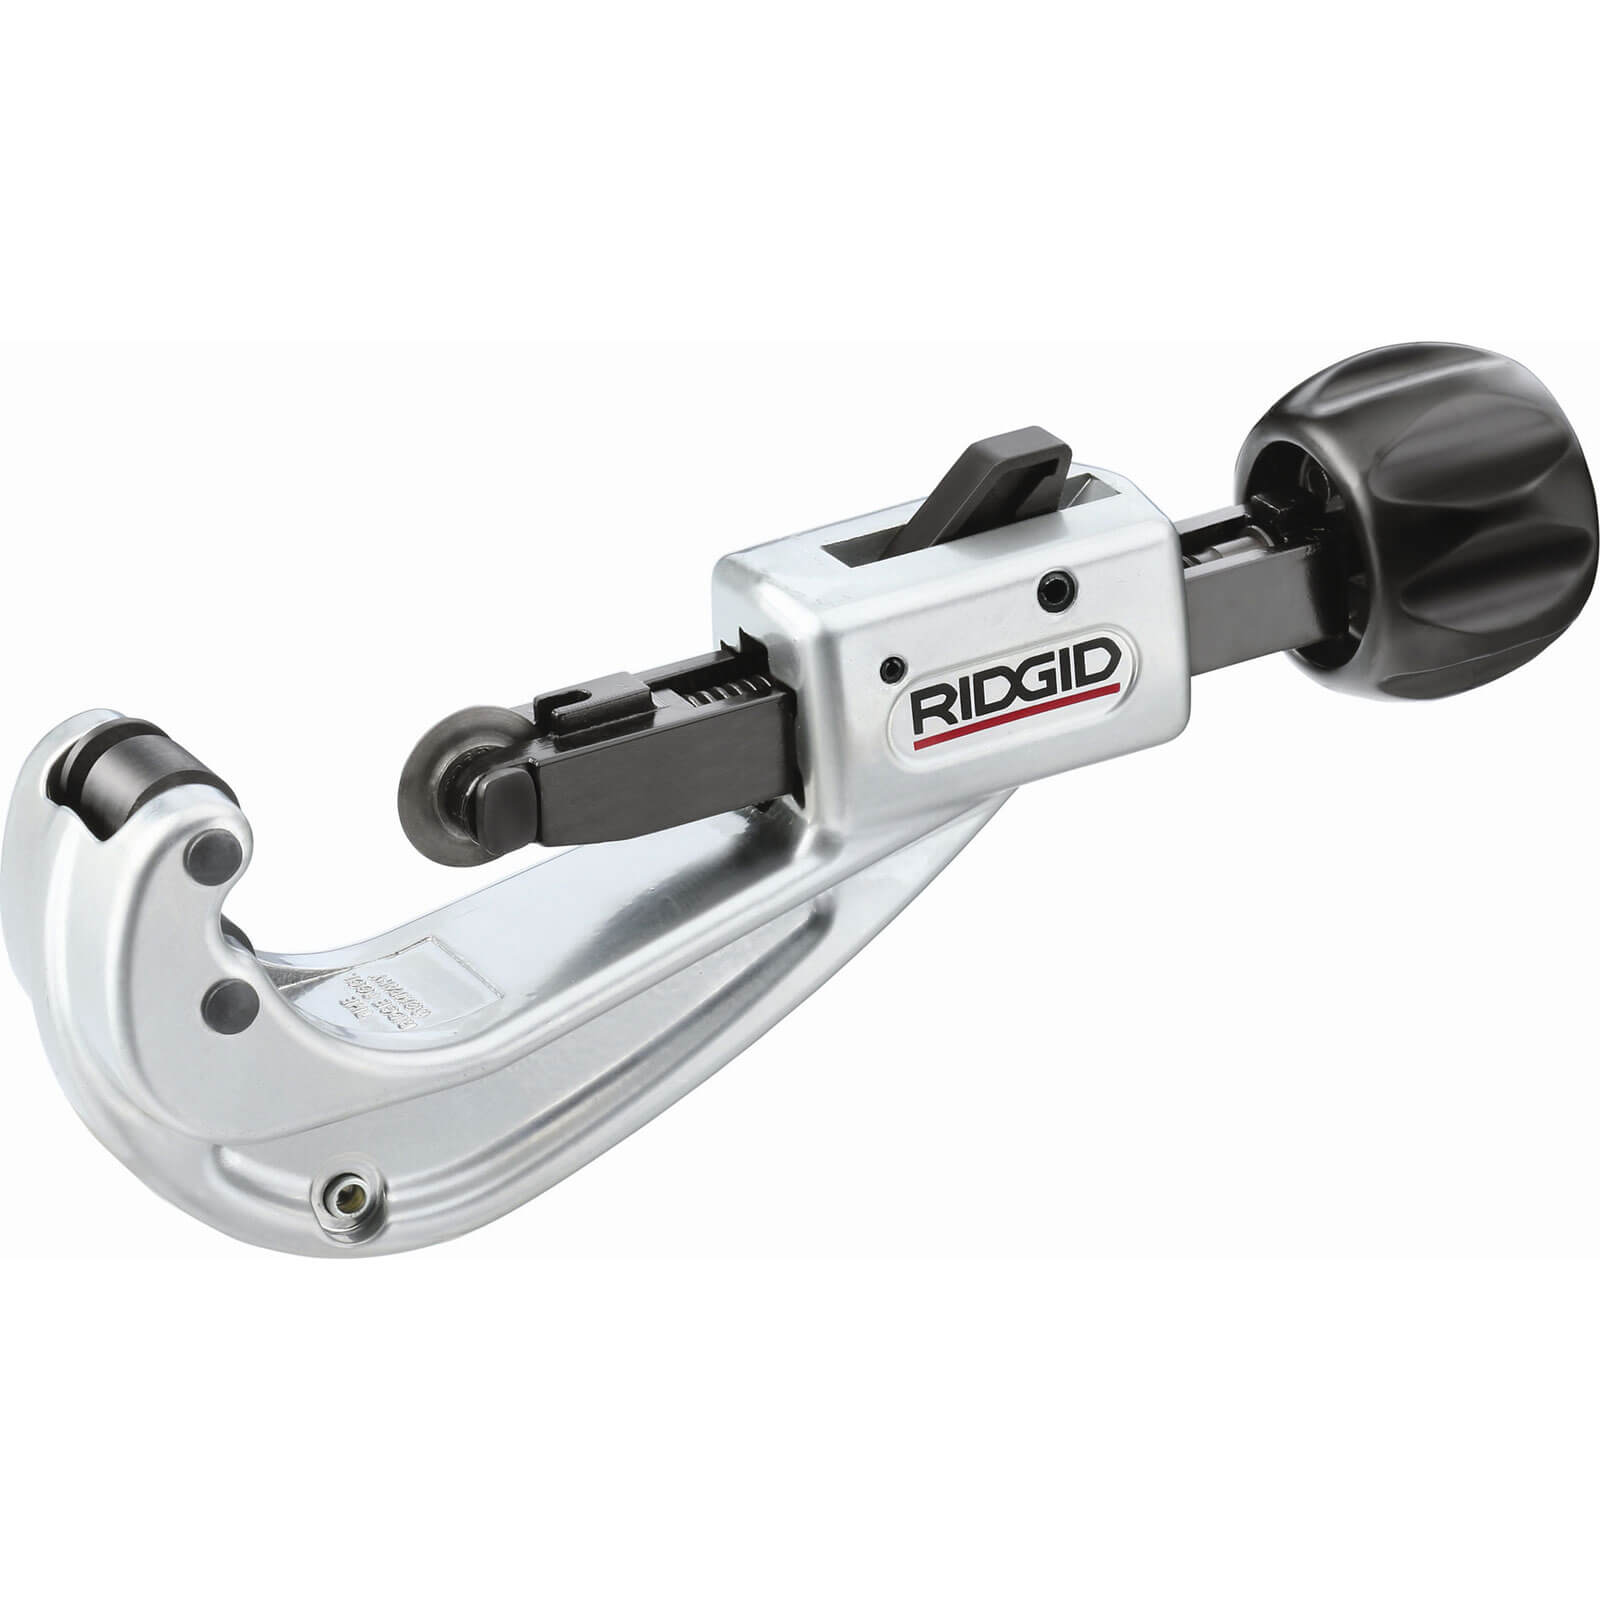 Image of Ridgid Quick Acting Platic Pipe Cutter 10mm - 50mm